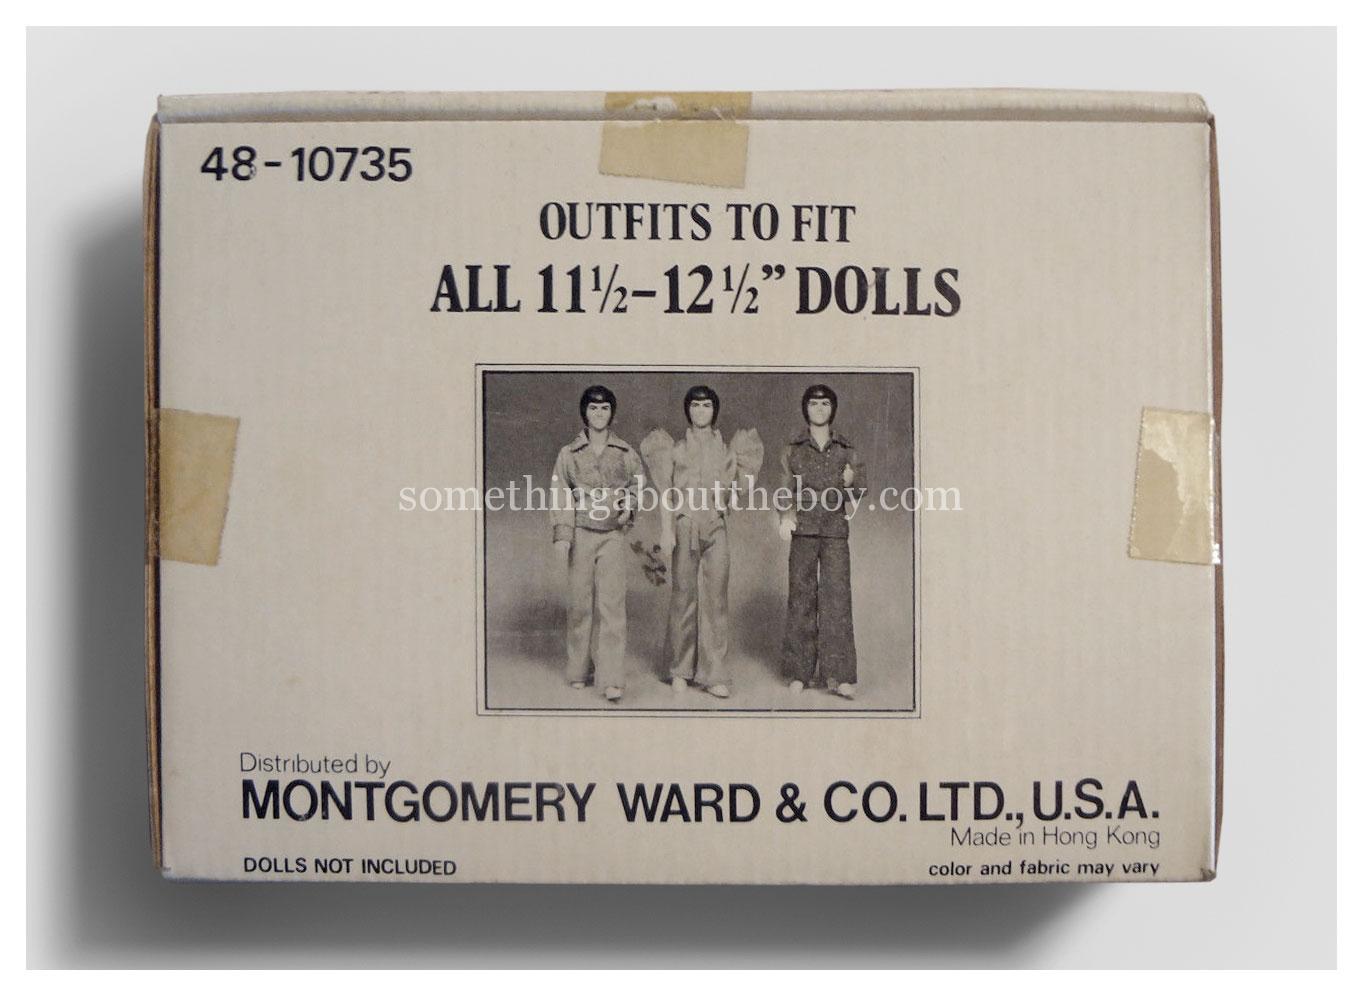 1978 Montgomery Ward Donny Osmond outfits original packaging